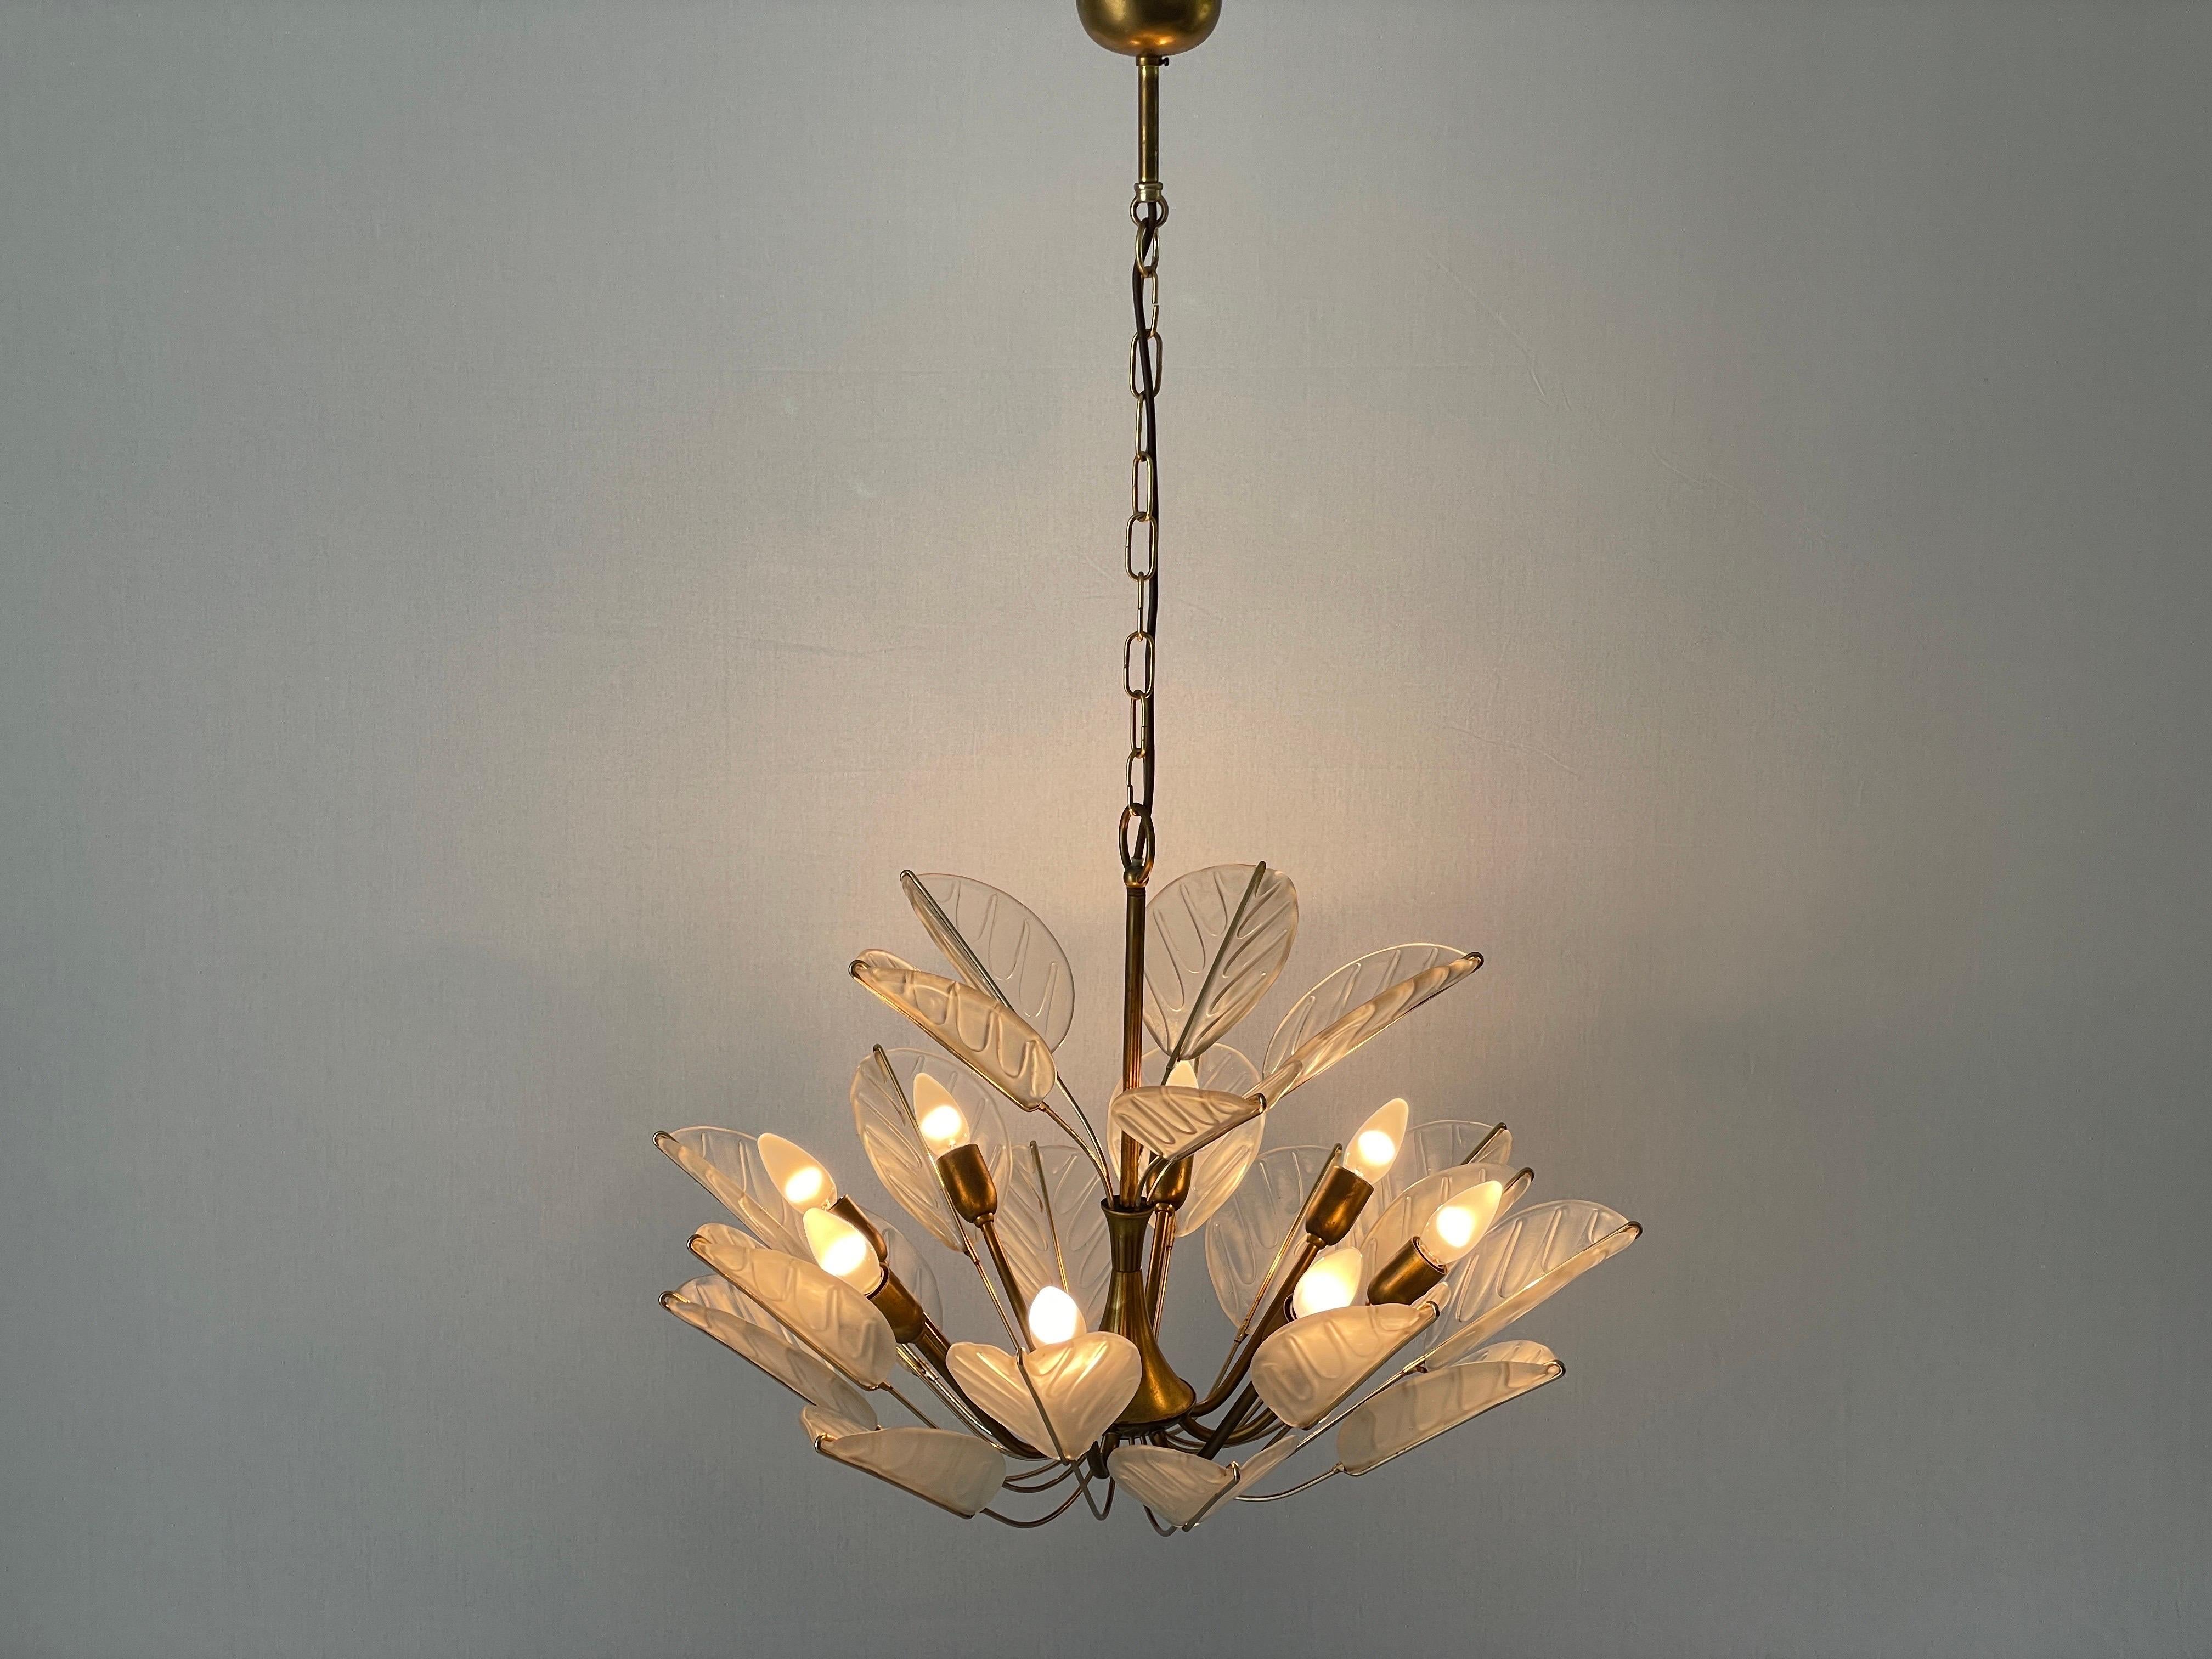 Luxurious 8-armed Brass Chandelier with Crystal Glass Leaves, 1960s, Germany For Sale 9